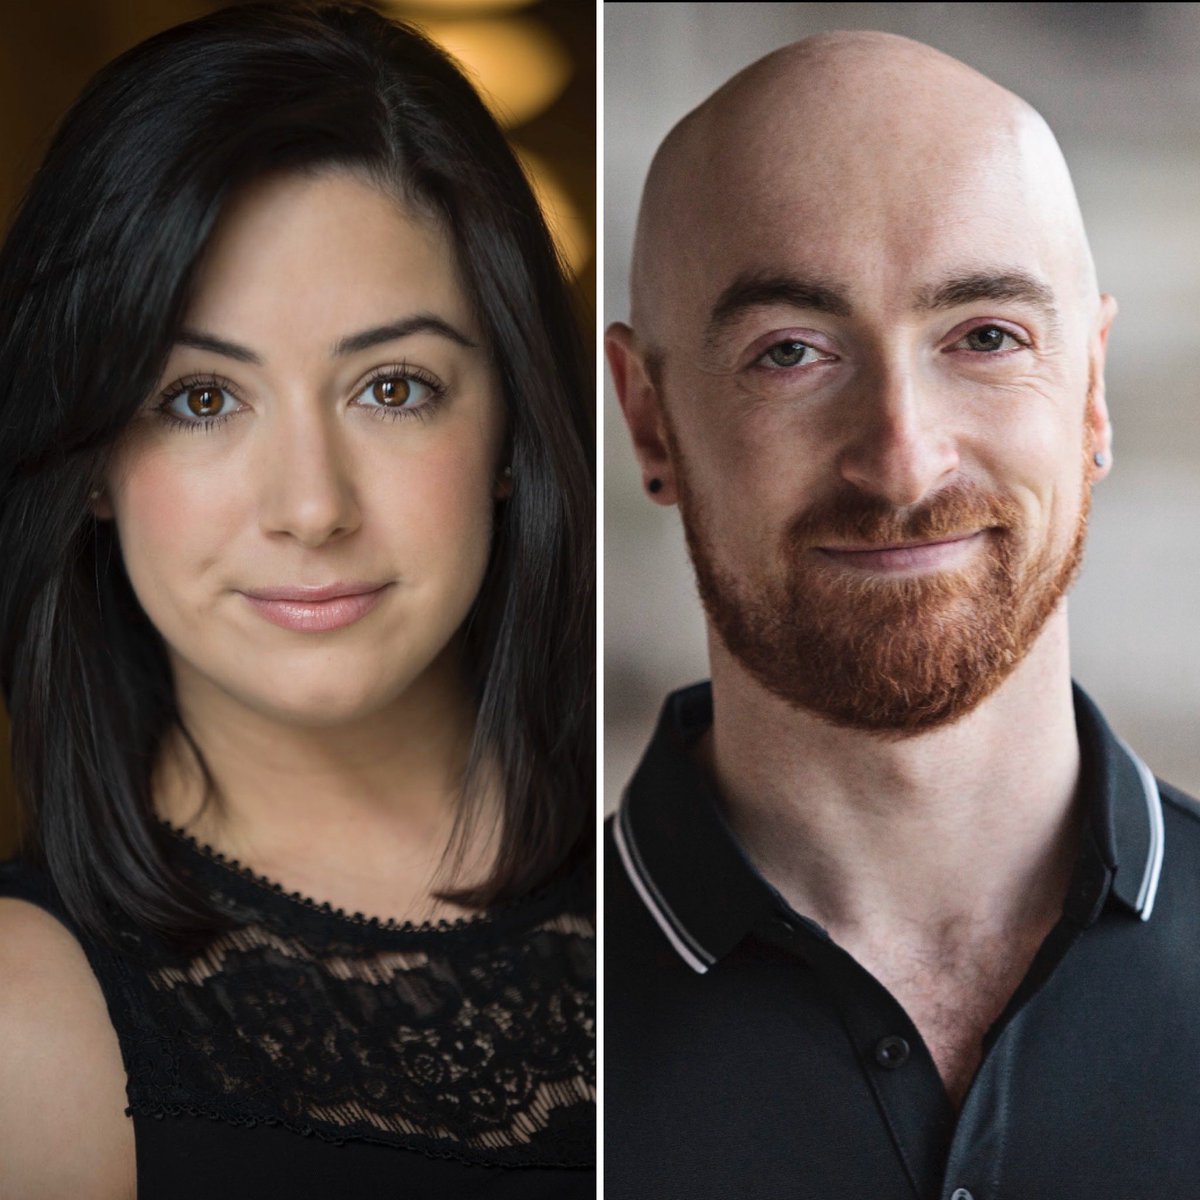 So excited that NYC based Irish Artists Sarah Ryan & Alan Kelly will be performing @irishplaywright David Gilna’s #MyBedsitWindow this Monday 8pm EST #ZOOM Part of @OriginTheatre1 #EUMONTHOFCULTURE 2021 Directed by @mickmellamphy Link to info in bio 🇮🇪🇪🇺 @EUintheUS @IrelandinNY